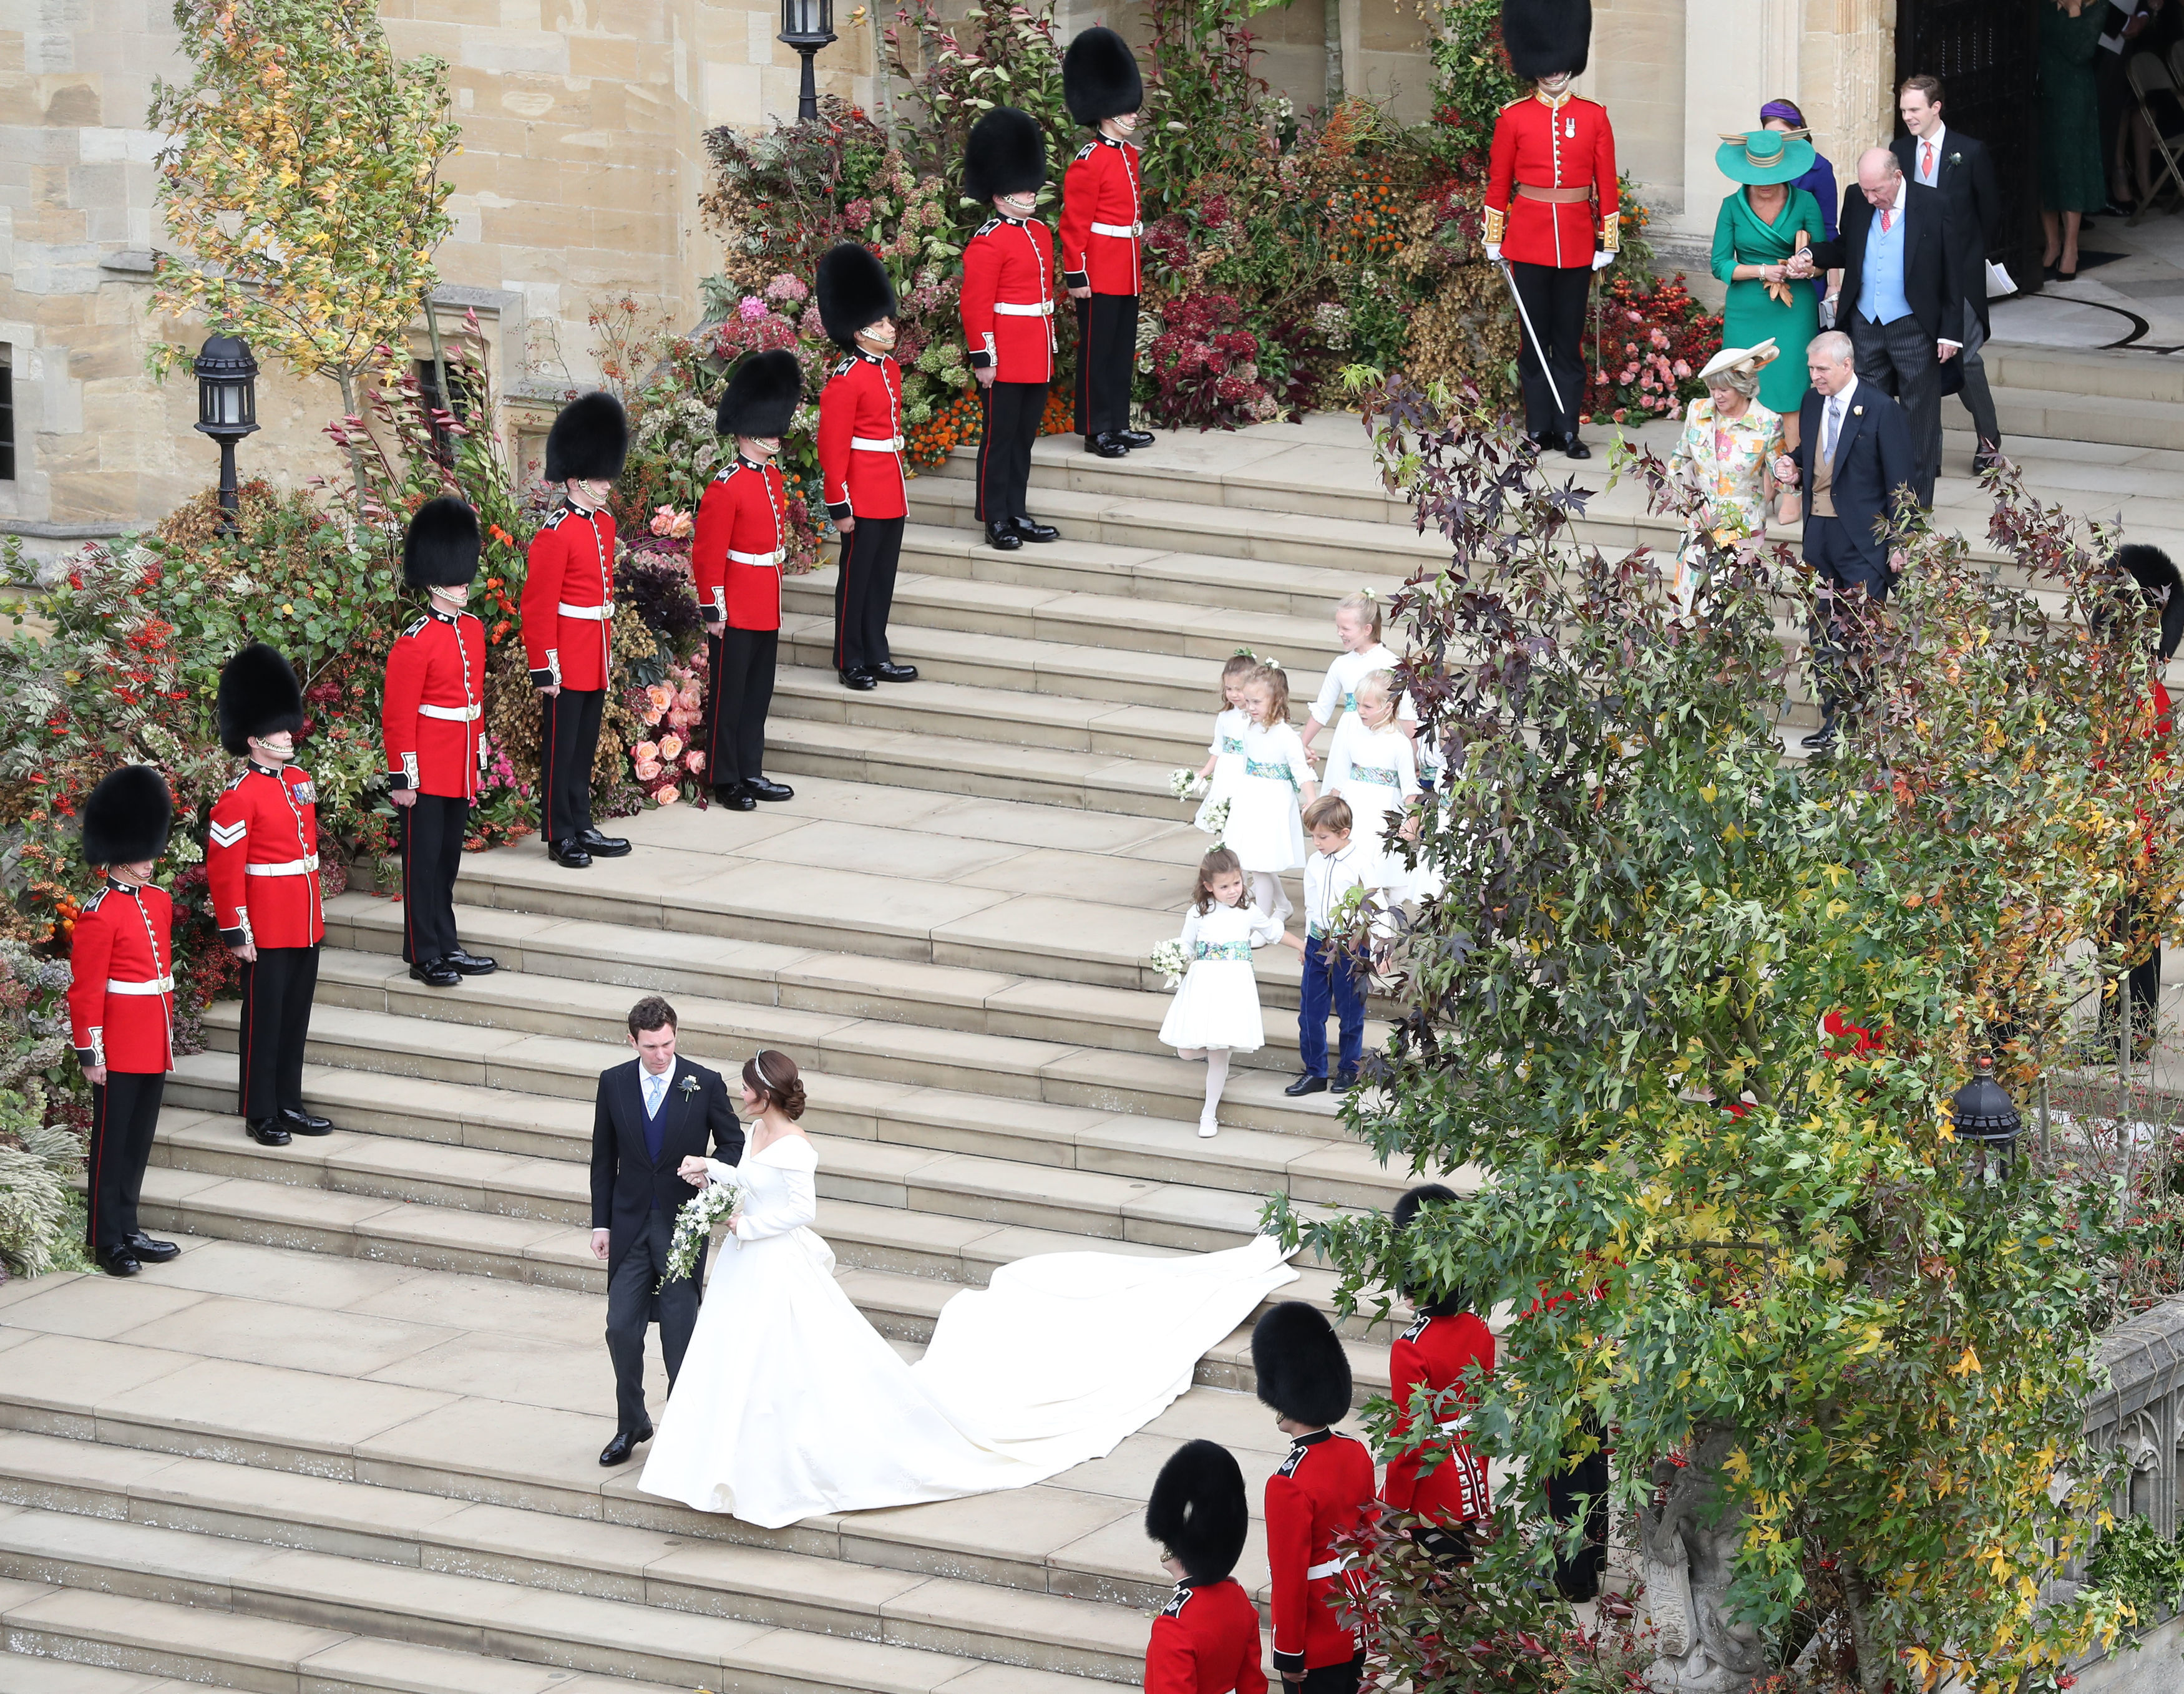 Princess Eugenie and her new husband Jack Brooksbank walk down the West Steps